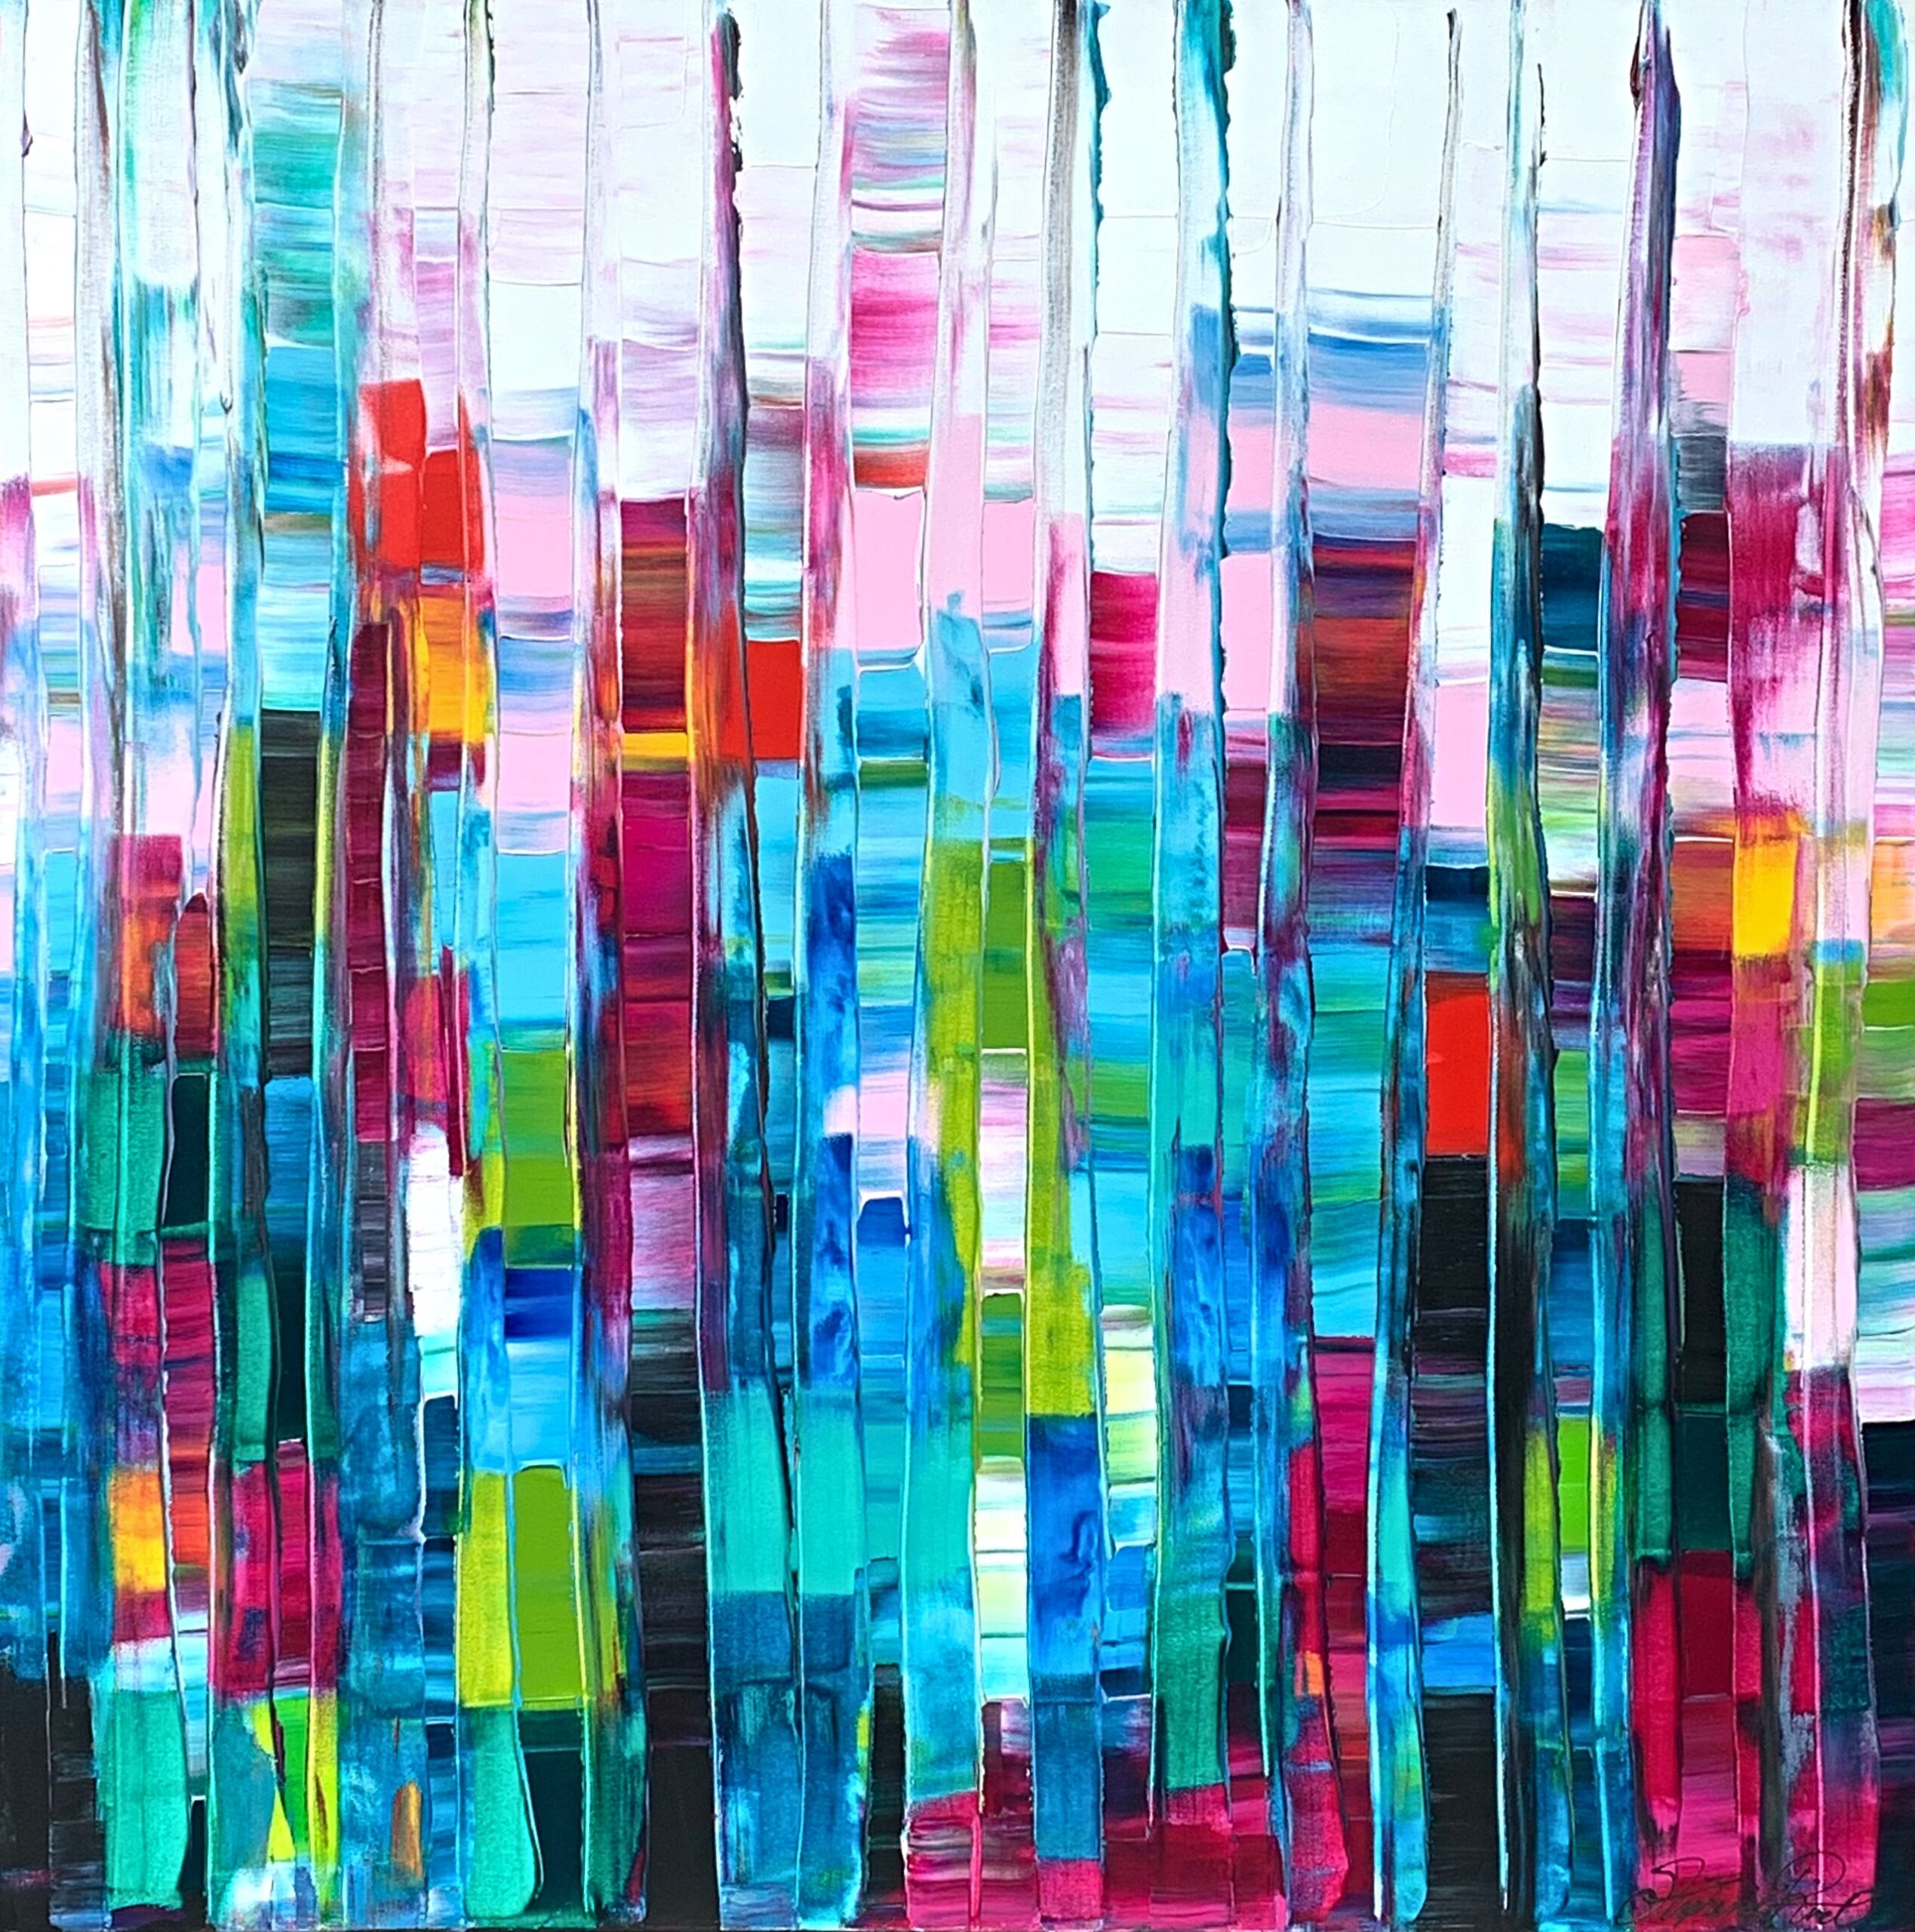 Vibrant abstract painting with turquoise blue, green, fuchsia and white by Stephanie Rivet.